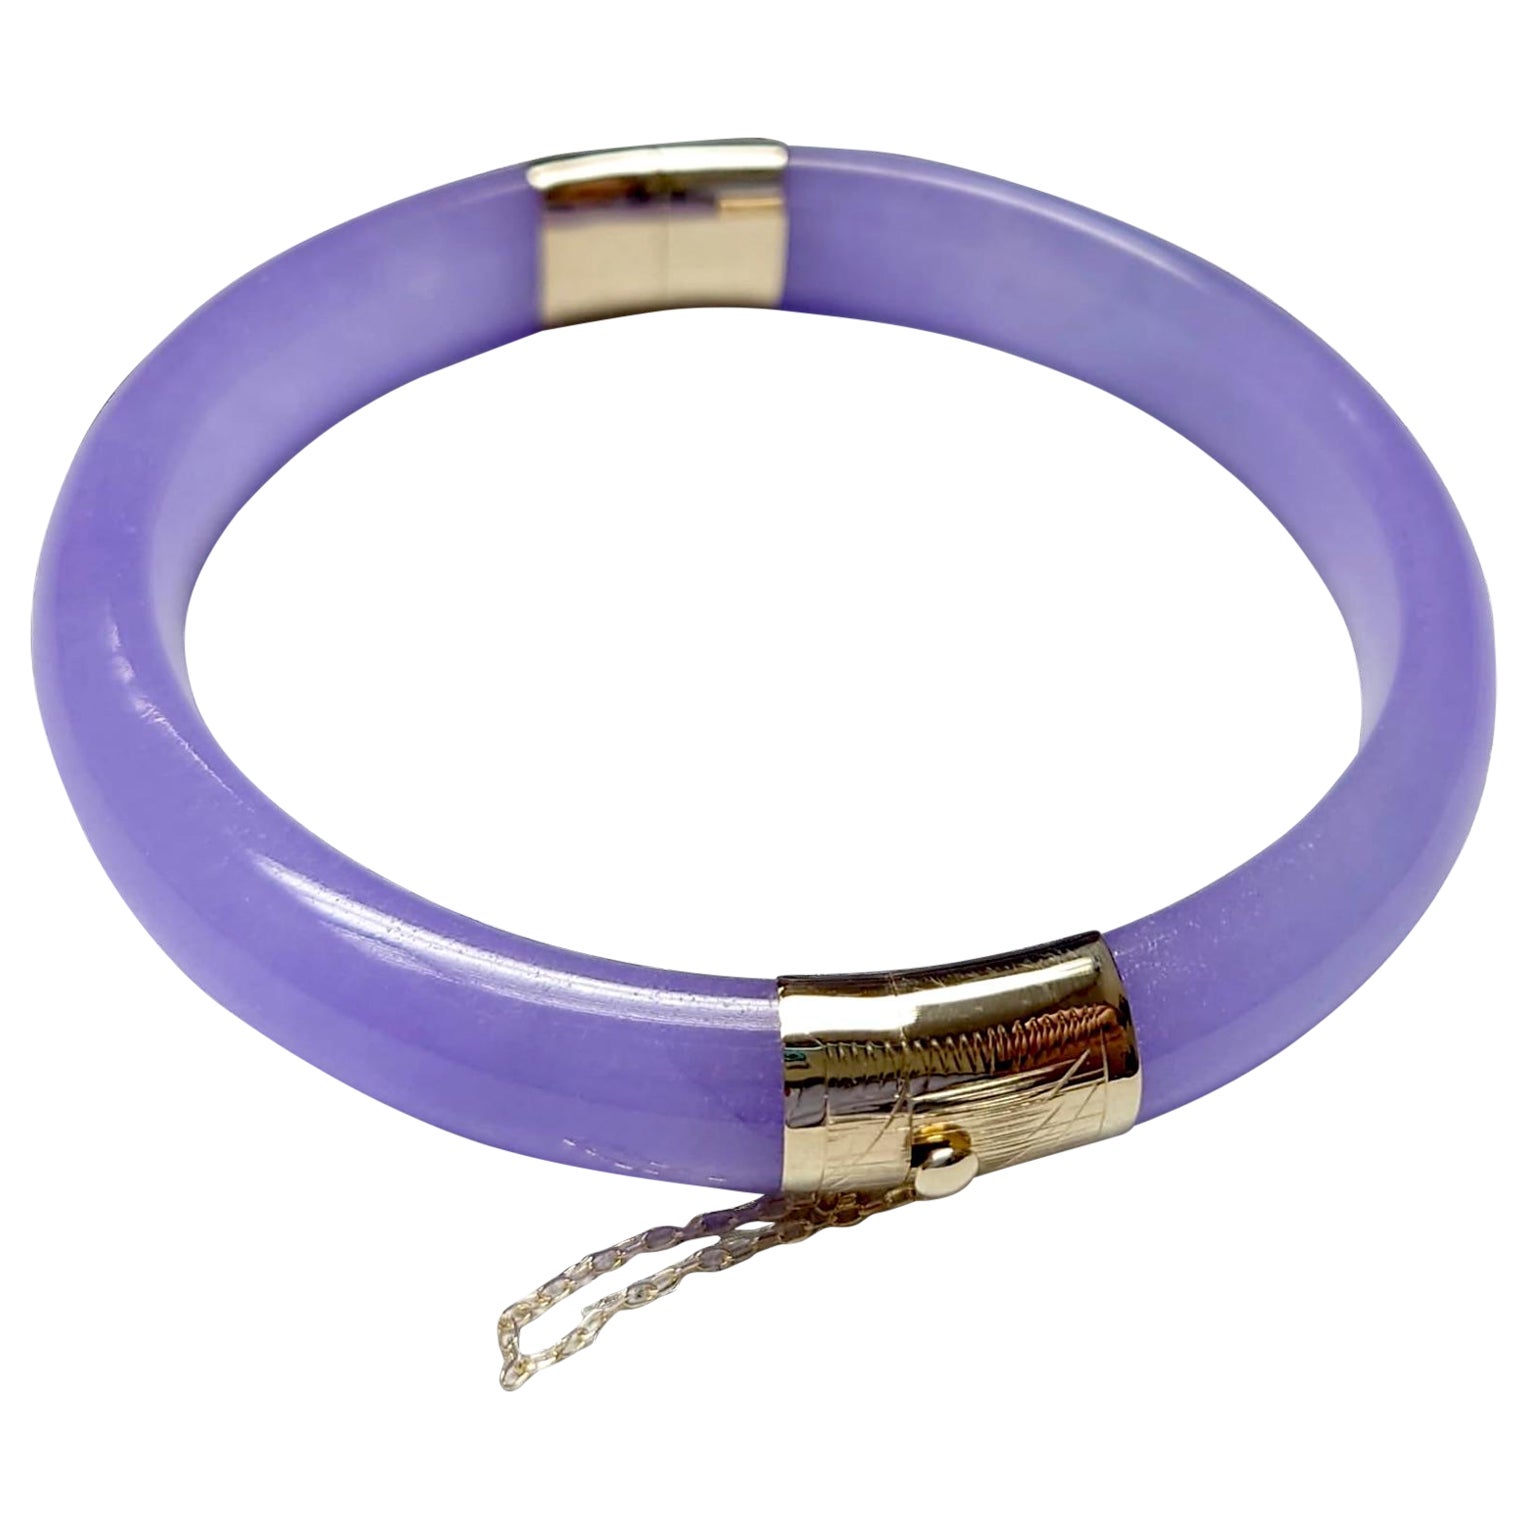 Viceroy's Circular Lavender Jade Bangle Bracelet (with 14K Yellow Gold) For Sale